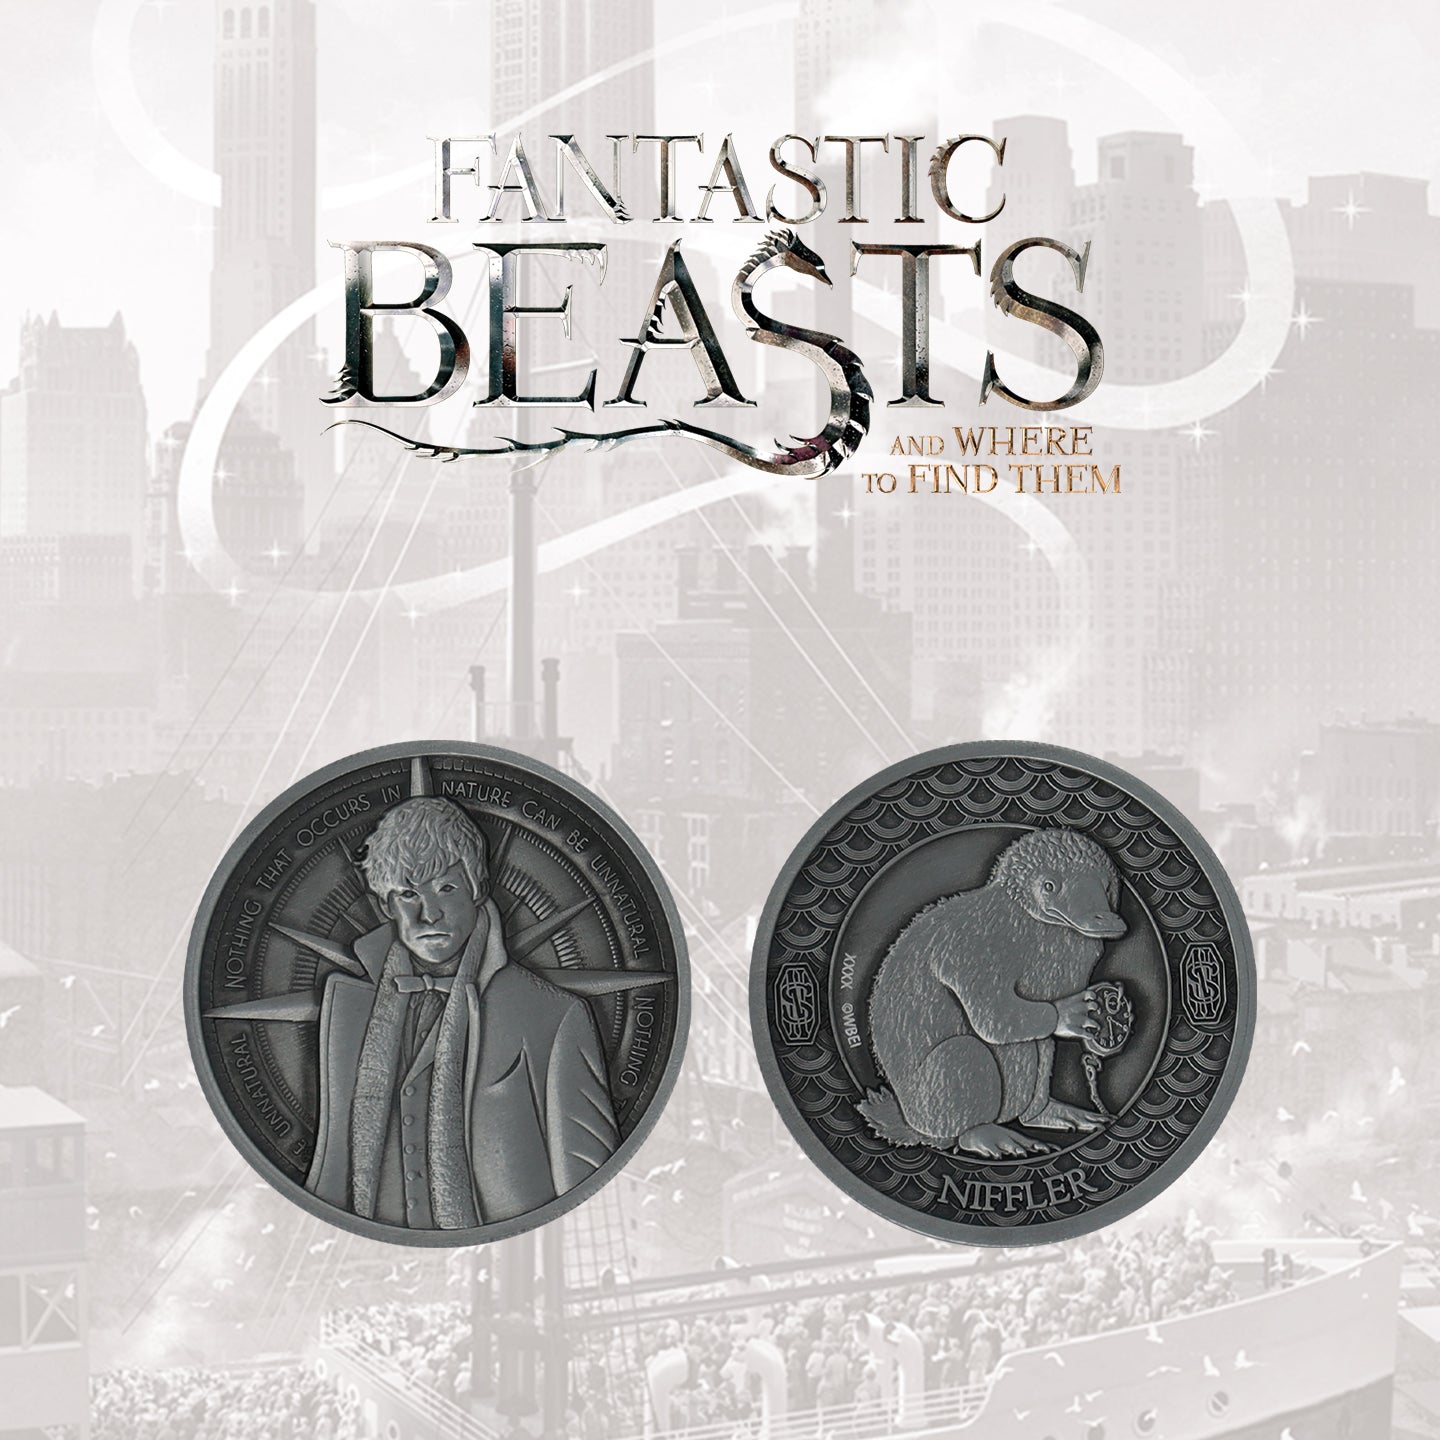 Fantastic Beasts Limited Edition Newt Scamander Collectible Coin